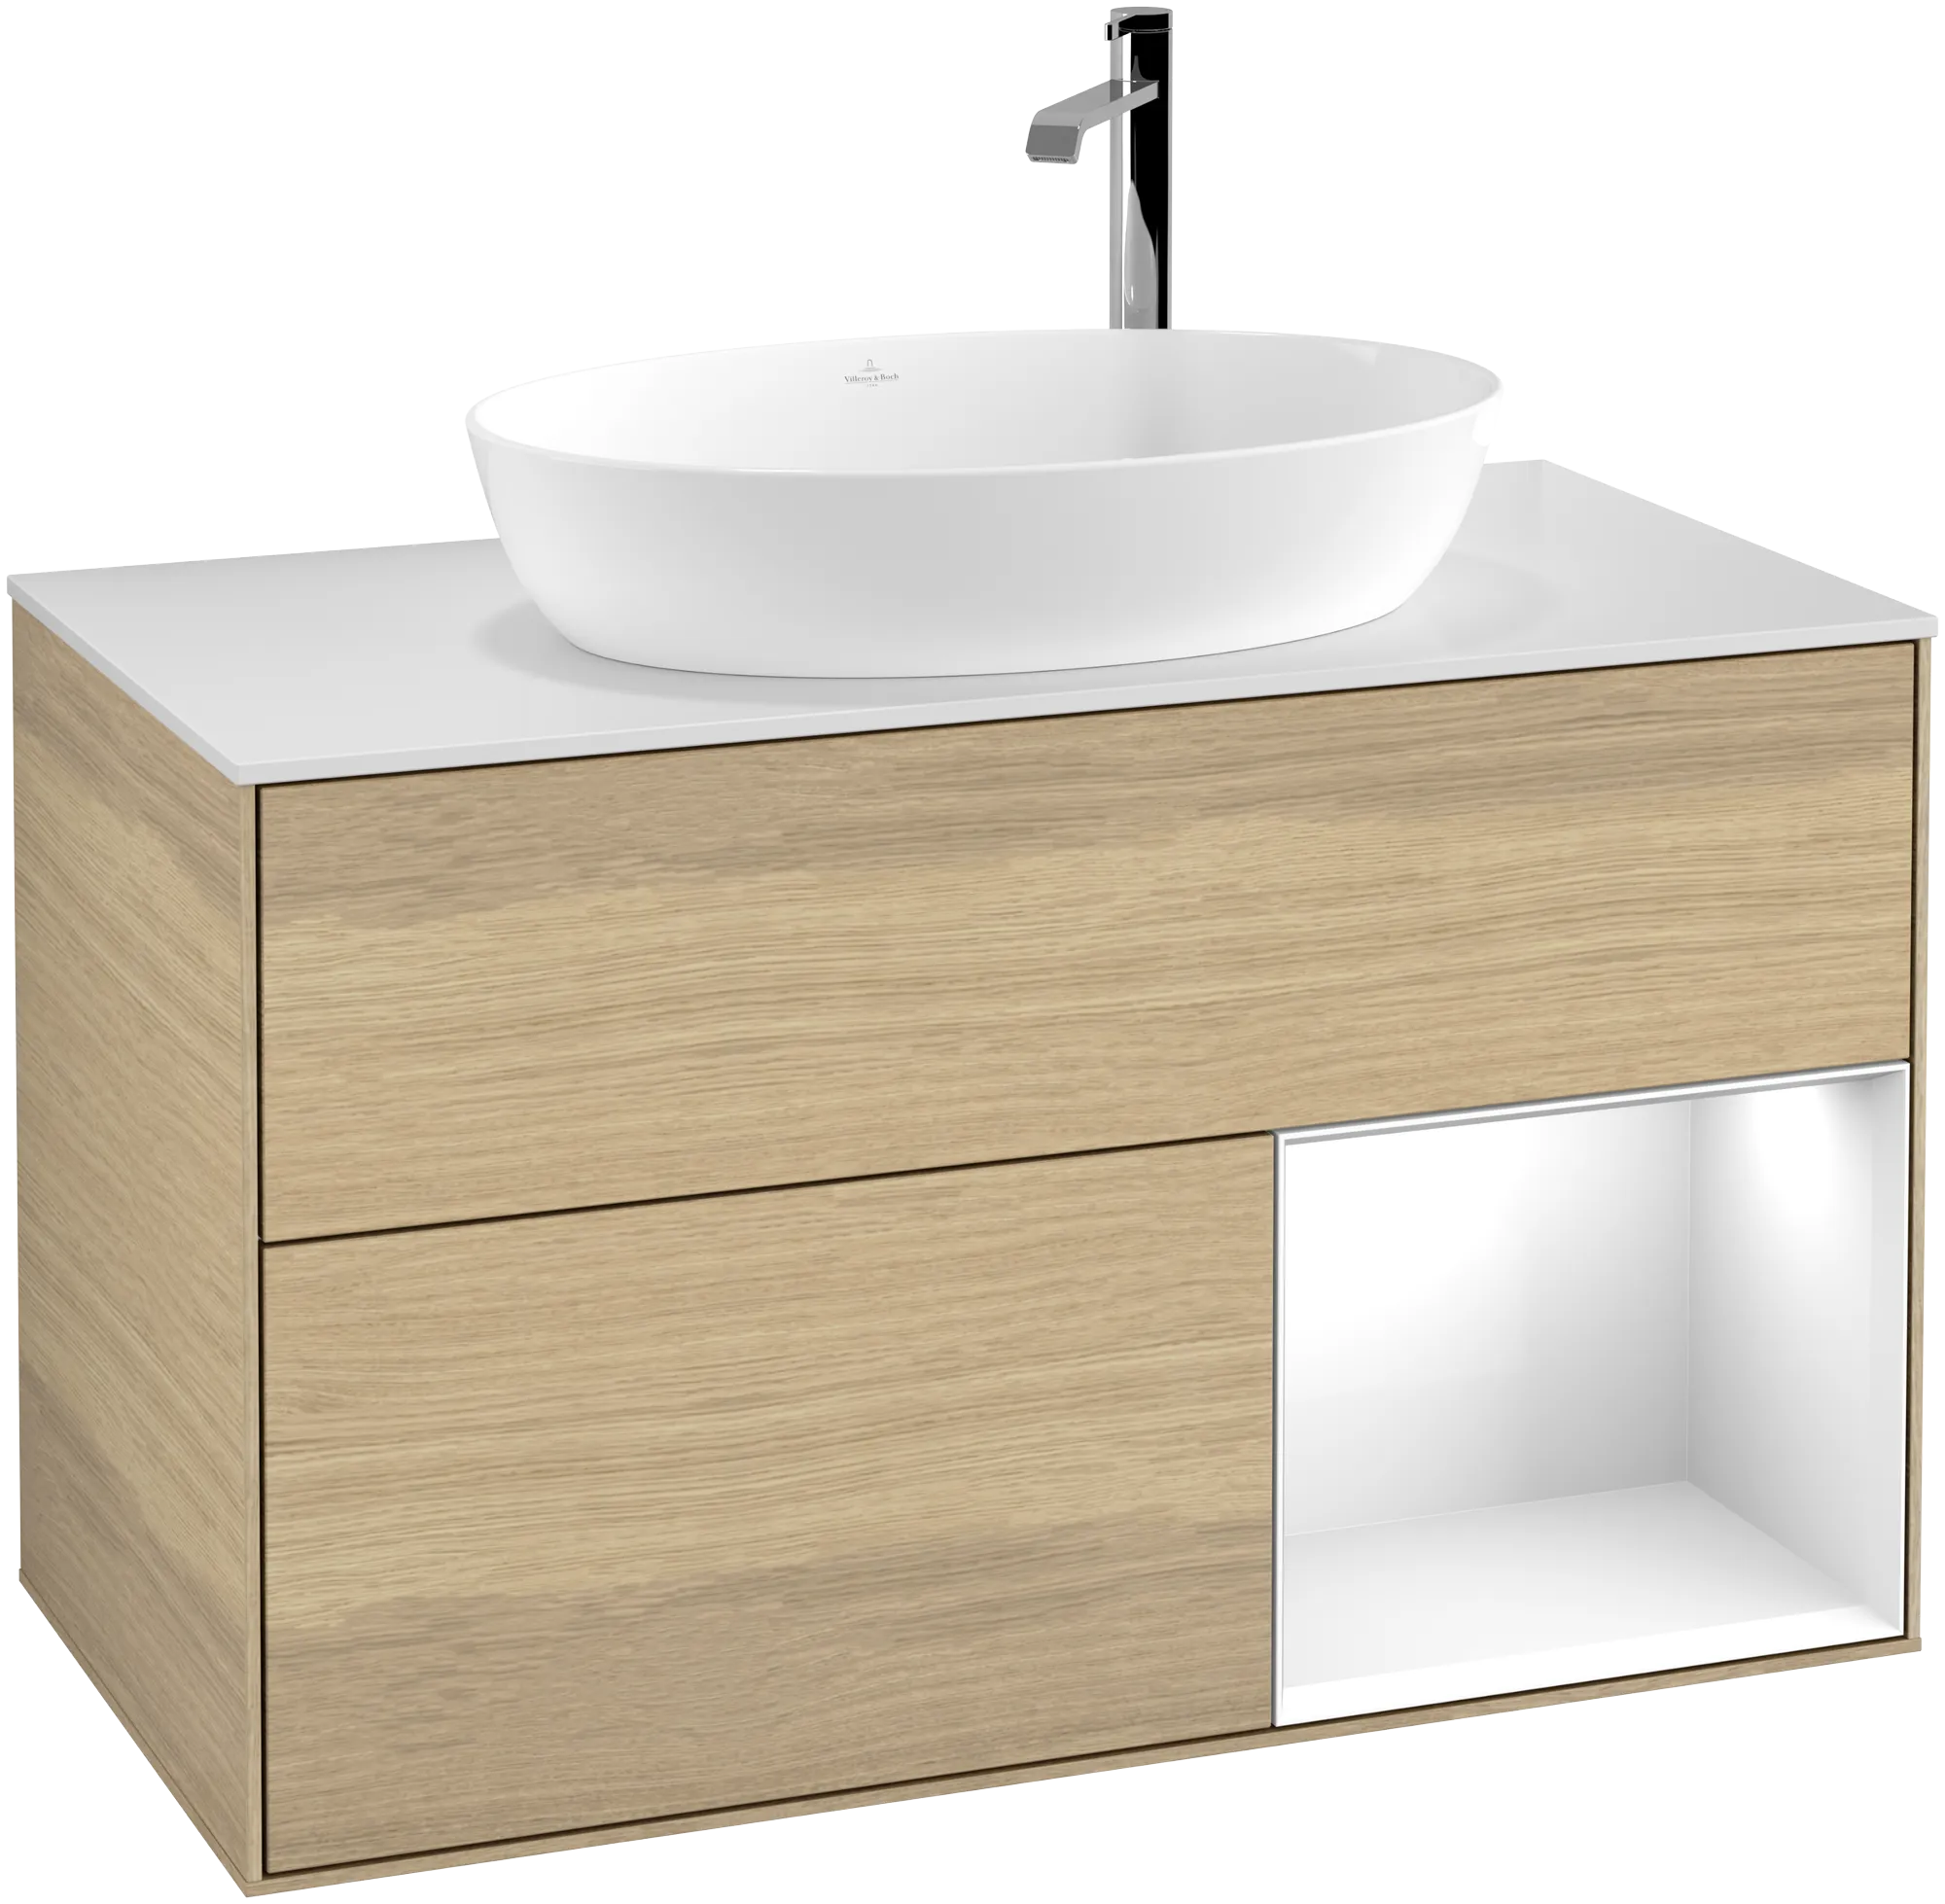 Picture of VILLEROY BOCH Finion Vanity unit, with lighting, 2 pull-out compartments, 1000 x 603 x 501 mm, Oak Veneer / Glossy White Lacquer / Glass White Matt #G901GFPC